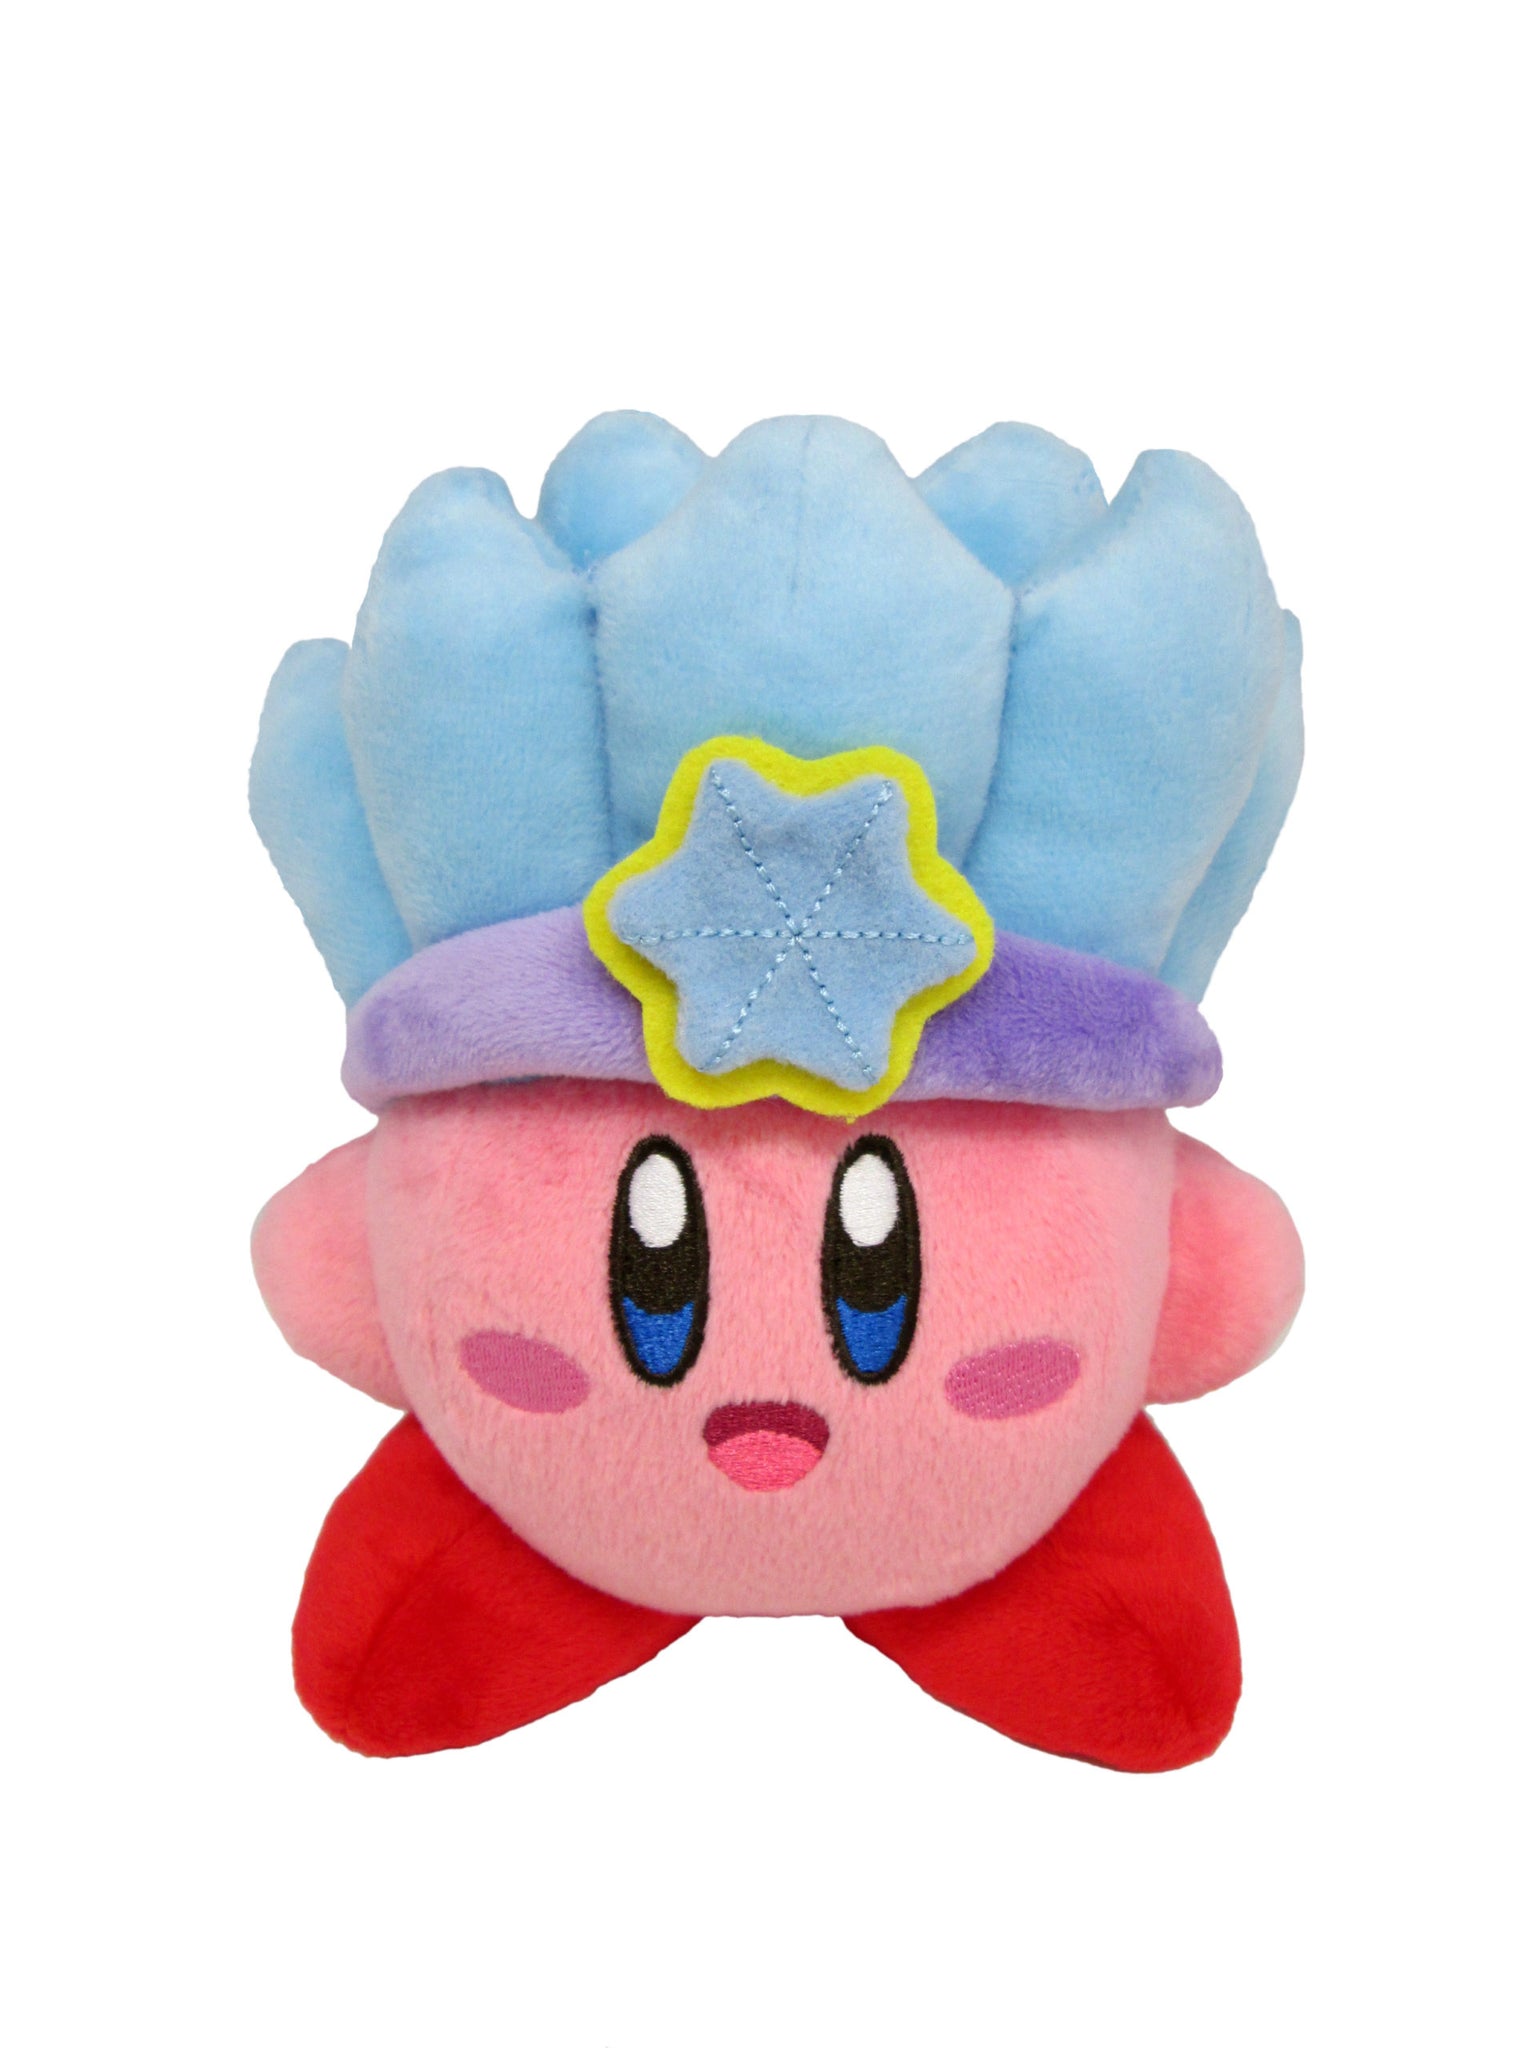 A pink kirby plush with an open-mouth embroidered smile. He is wearing a purple and blue crown made of ice.